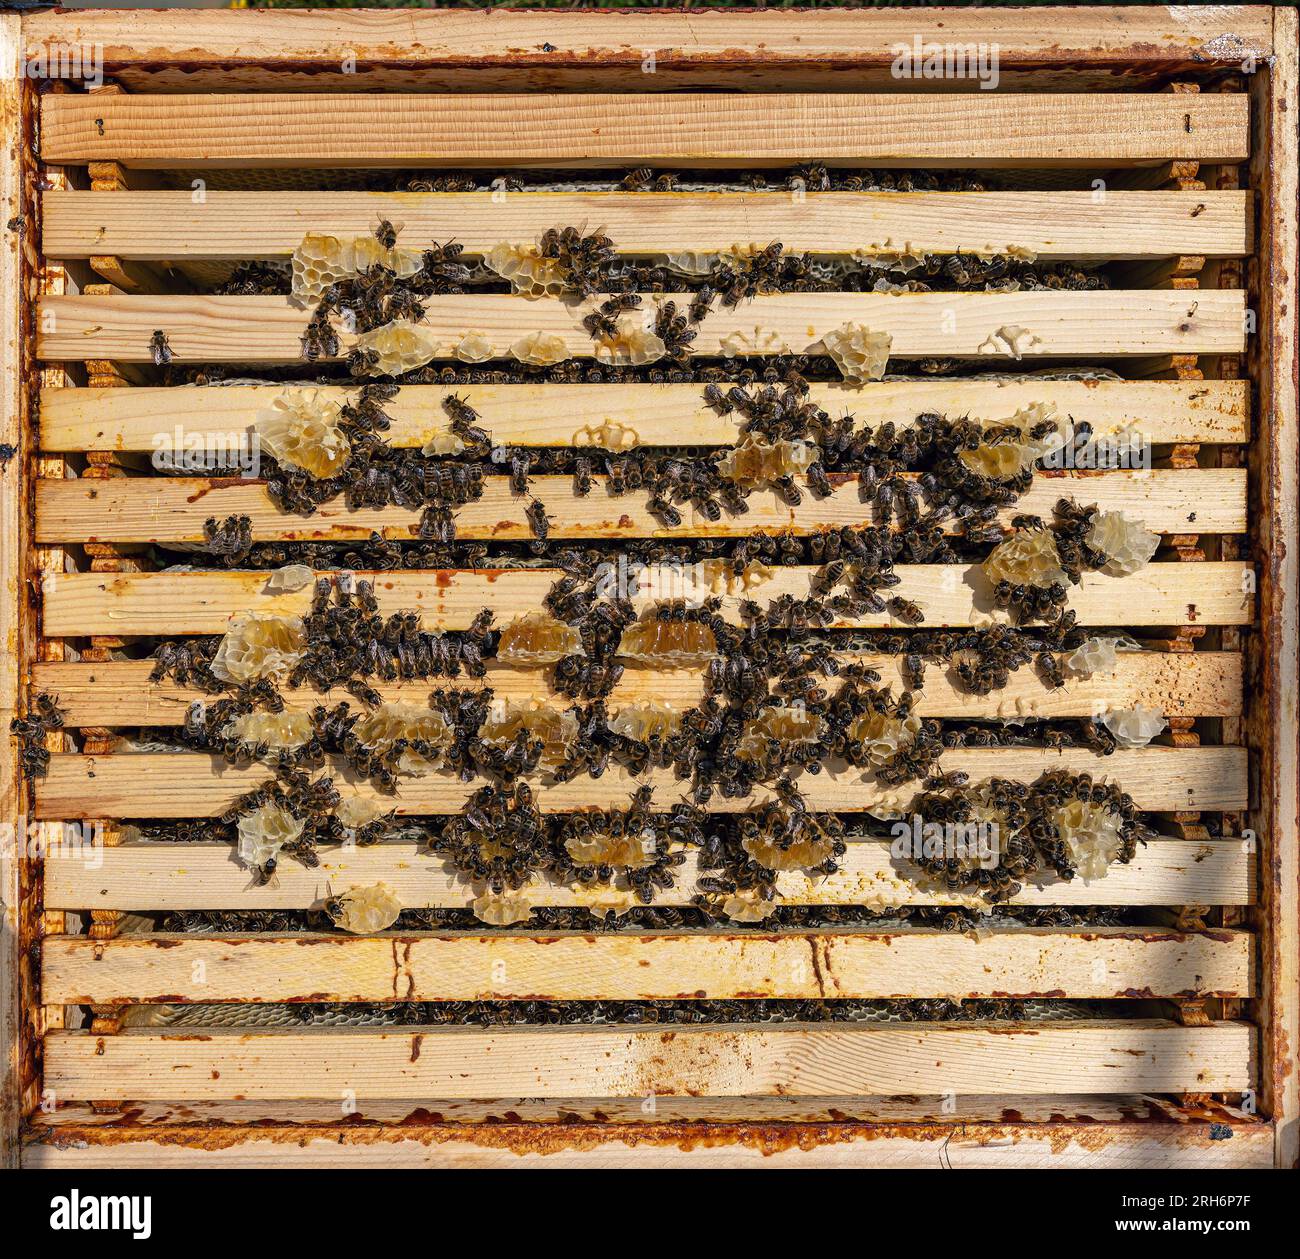 Working bees on honey cells. Apiary workflow. Stock Photo